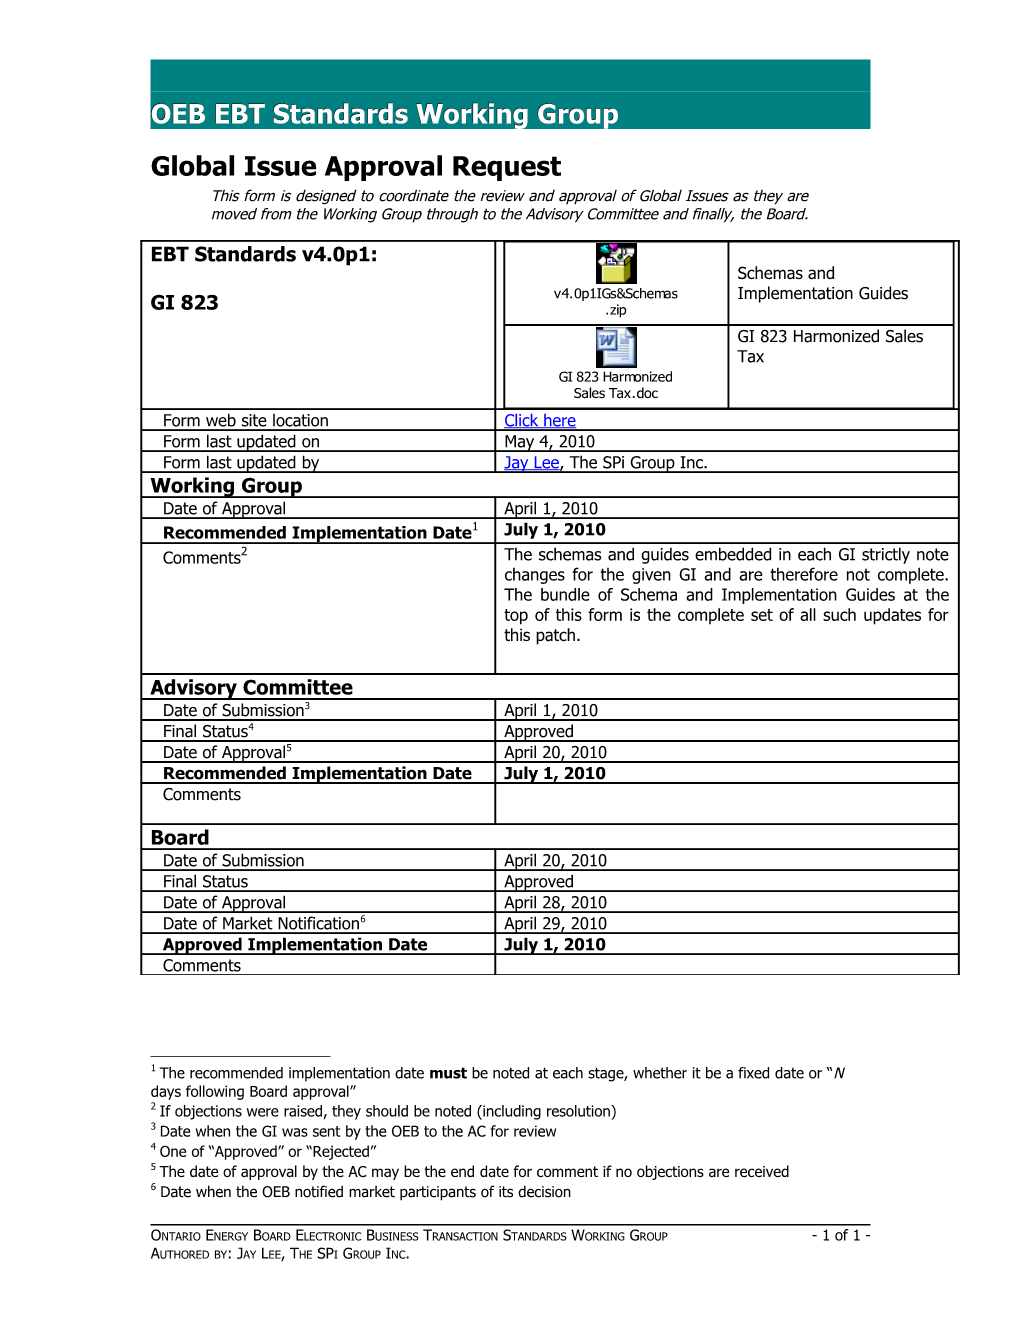 Global Issue Approval Request